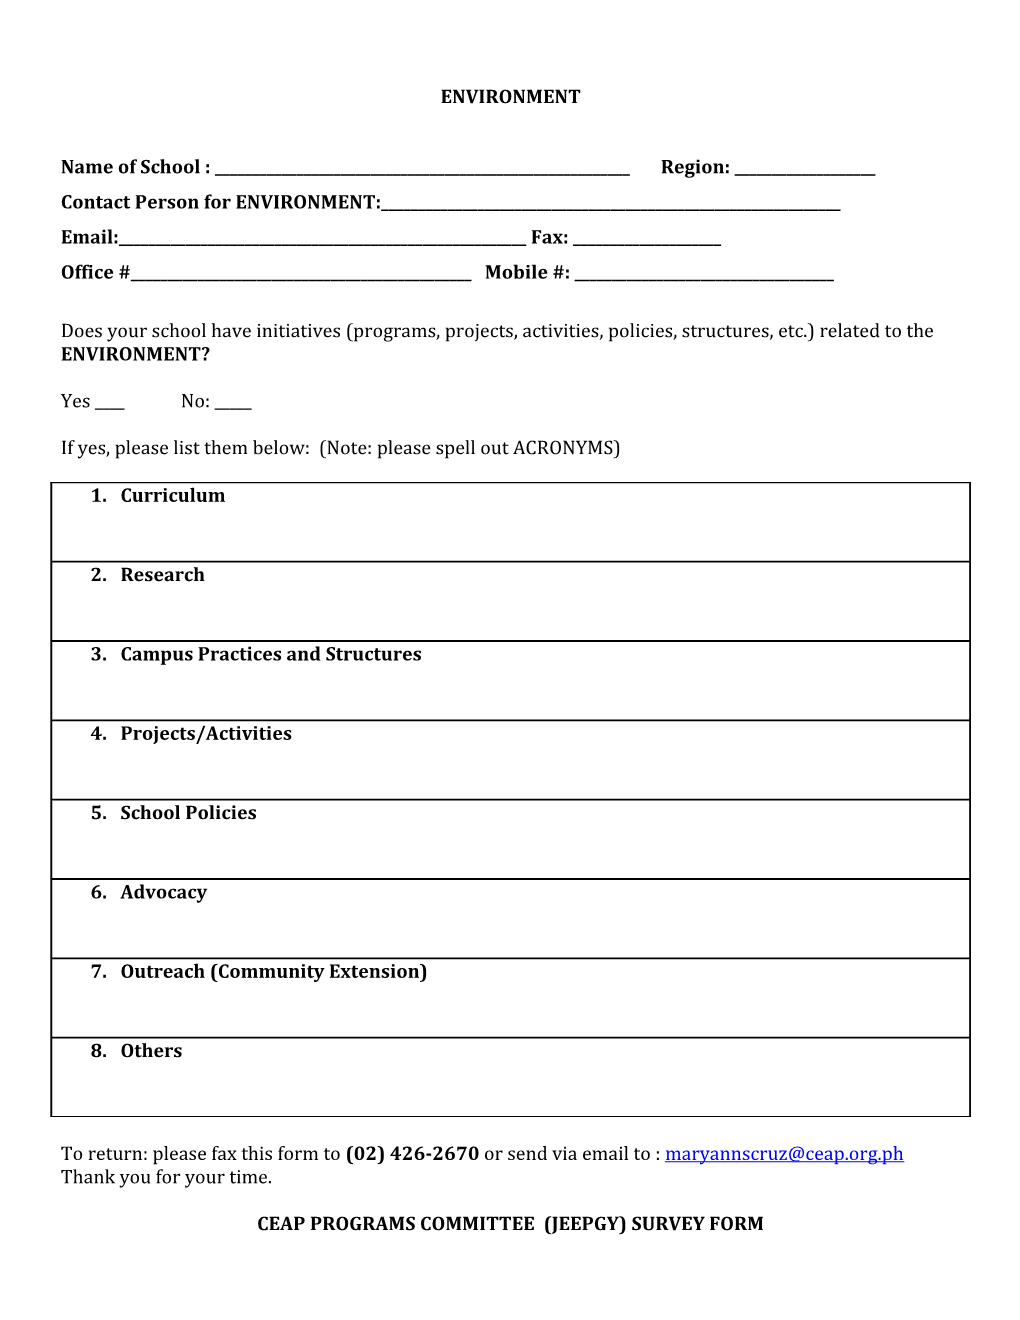 Ceap Programs Committee (Jeepgy) Survey Form